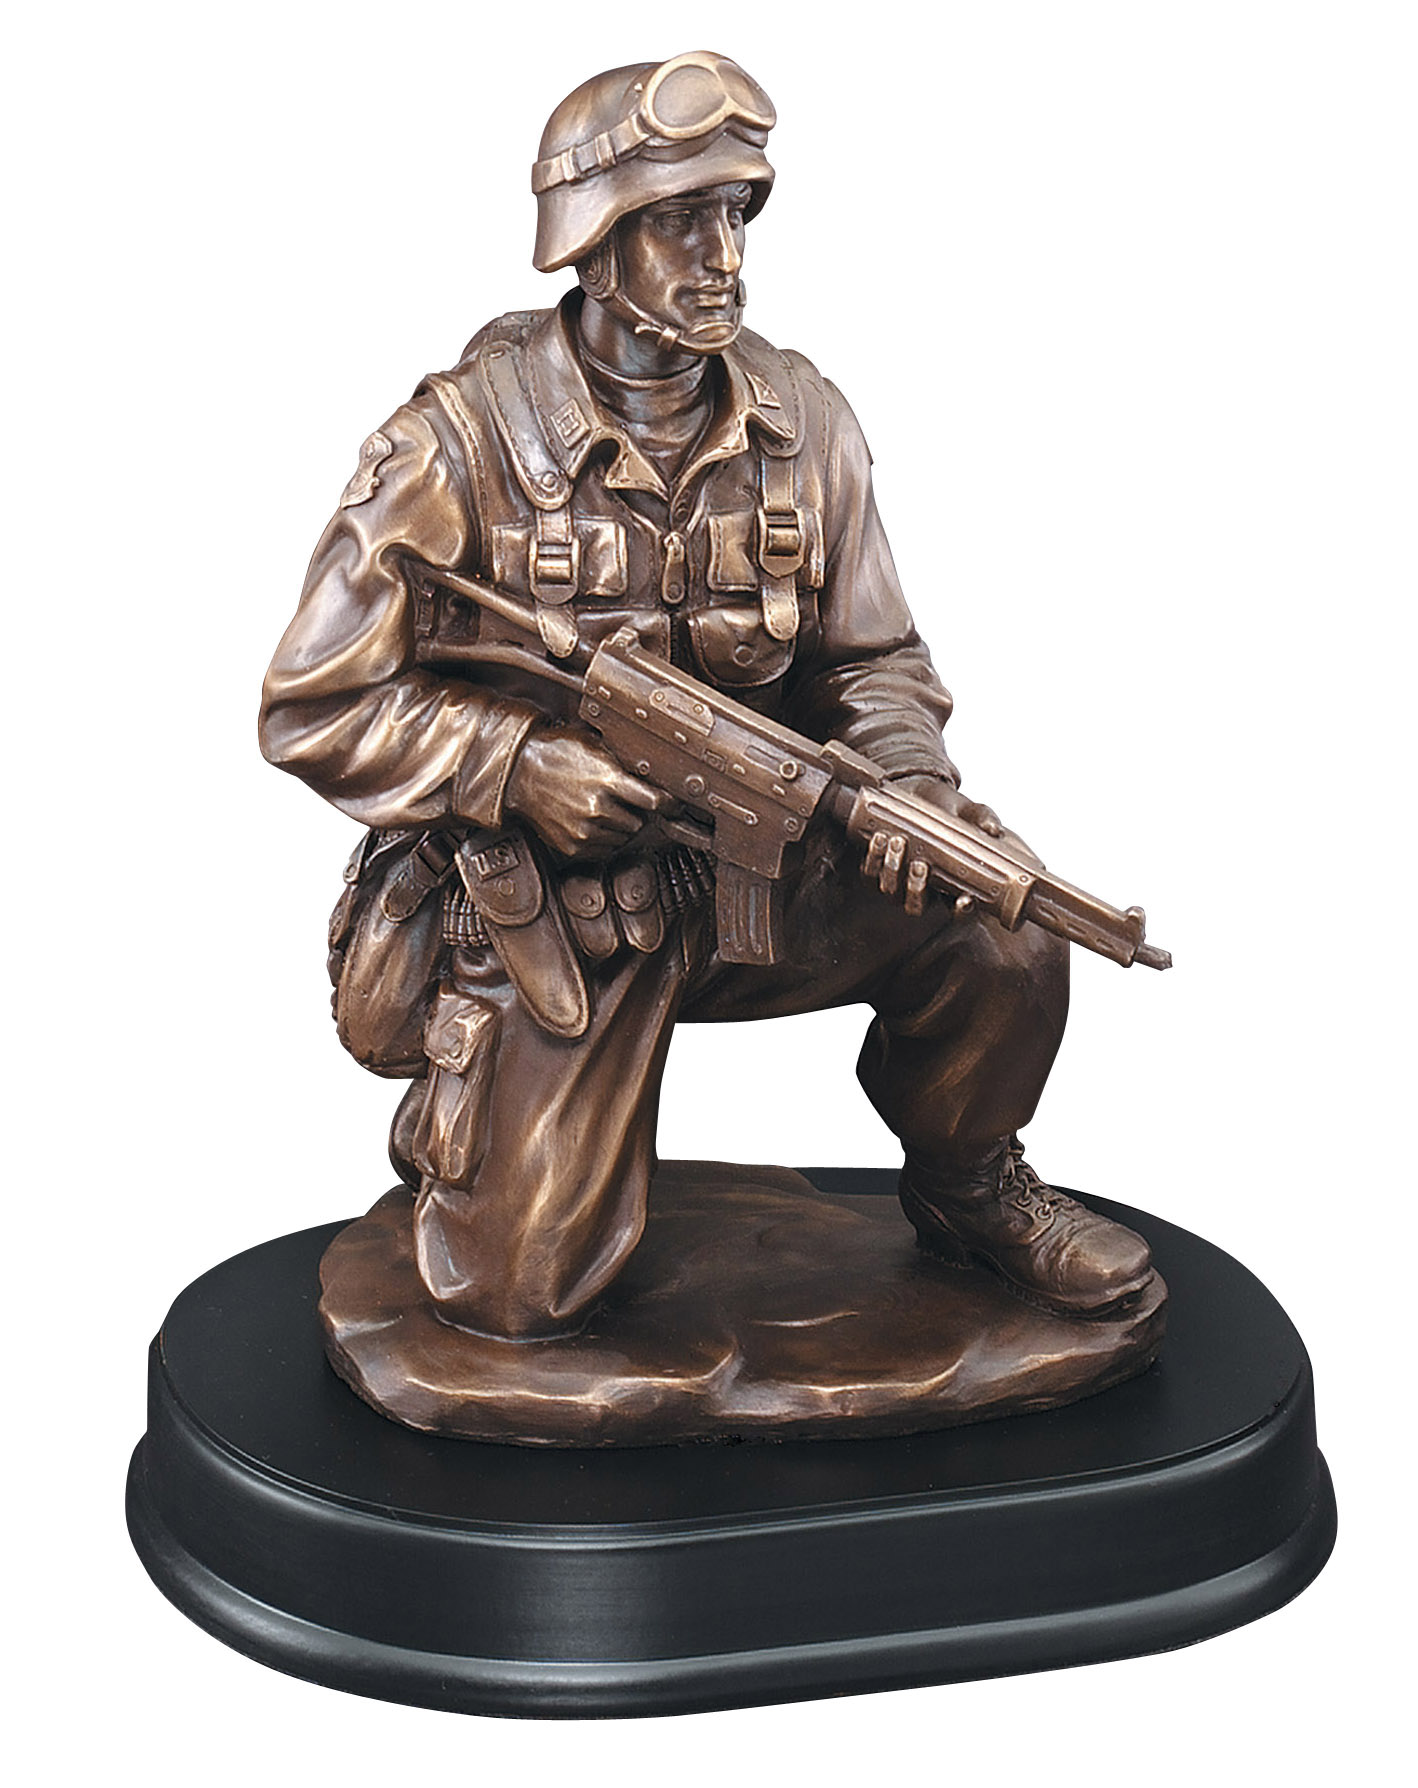 Soldier Kneeling With Rifle Down